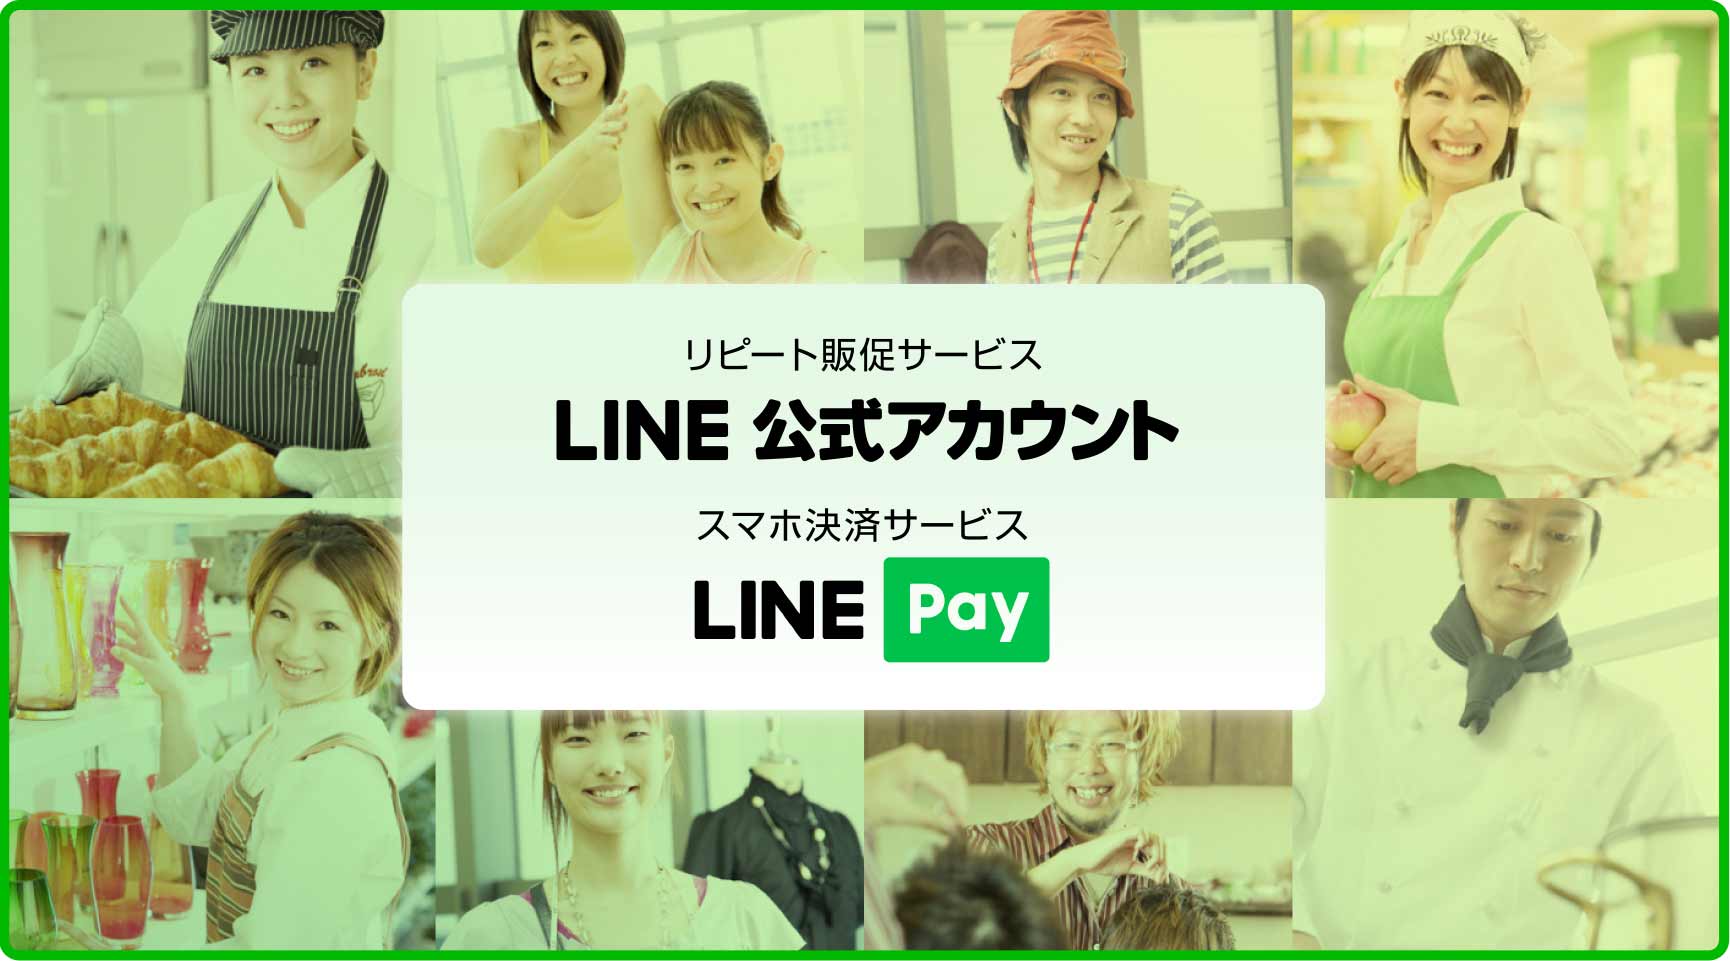 LINEAJEgELINE Pay